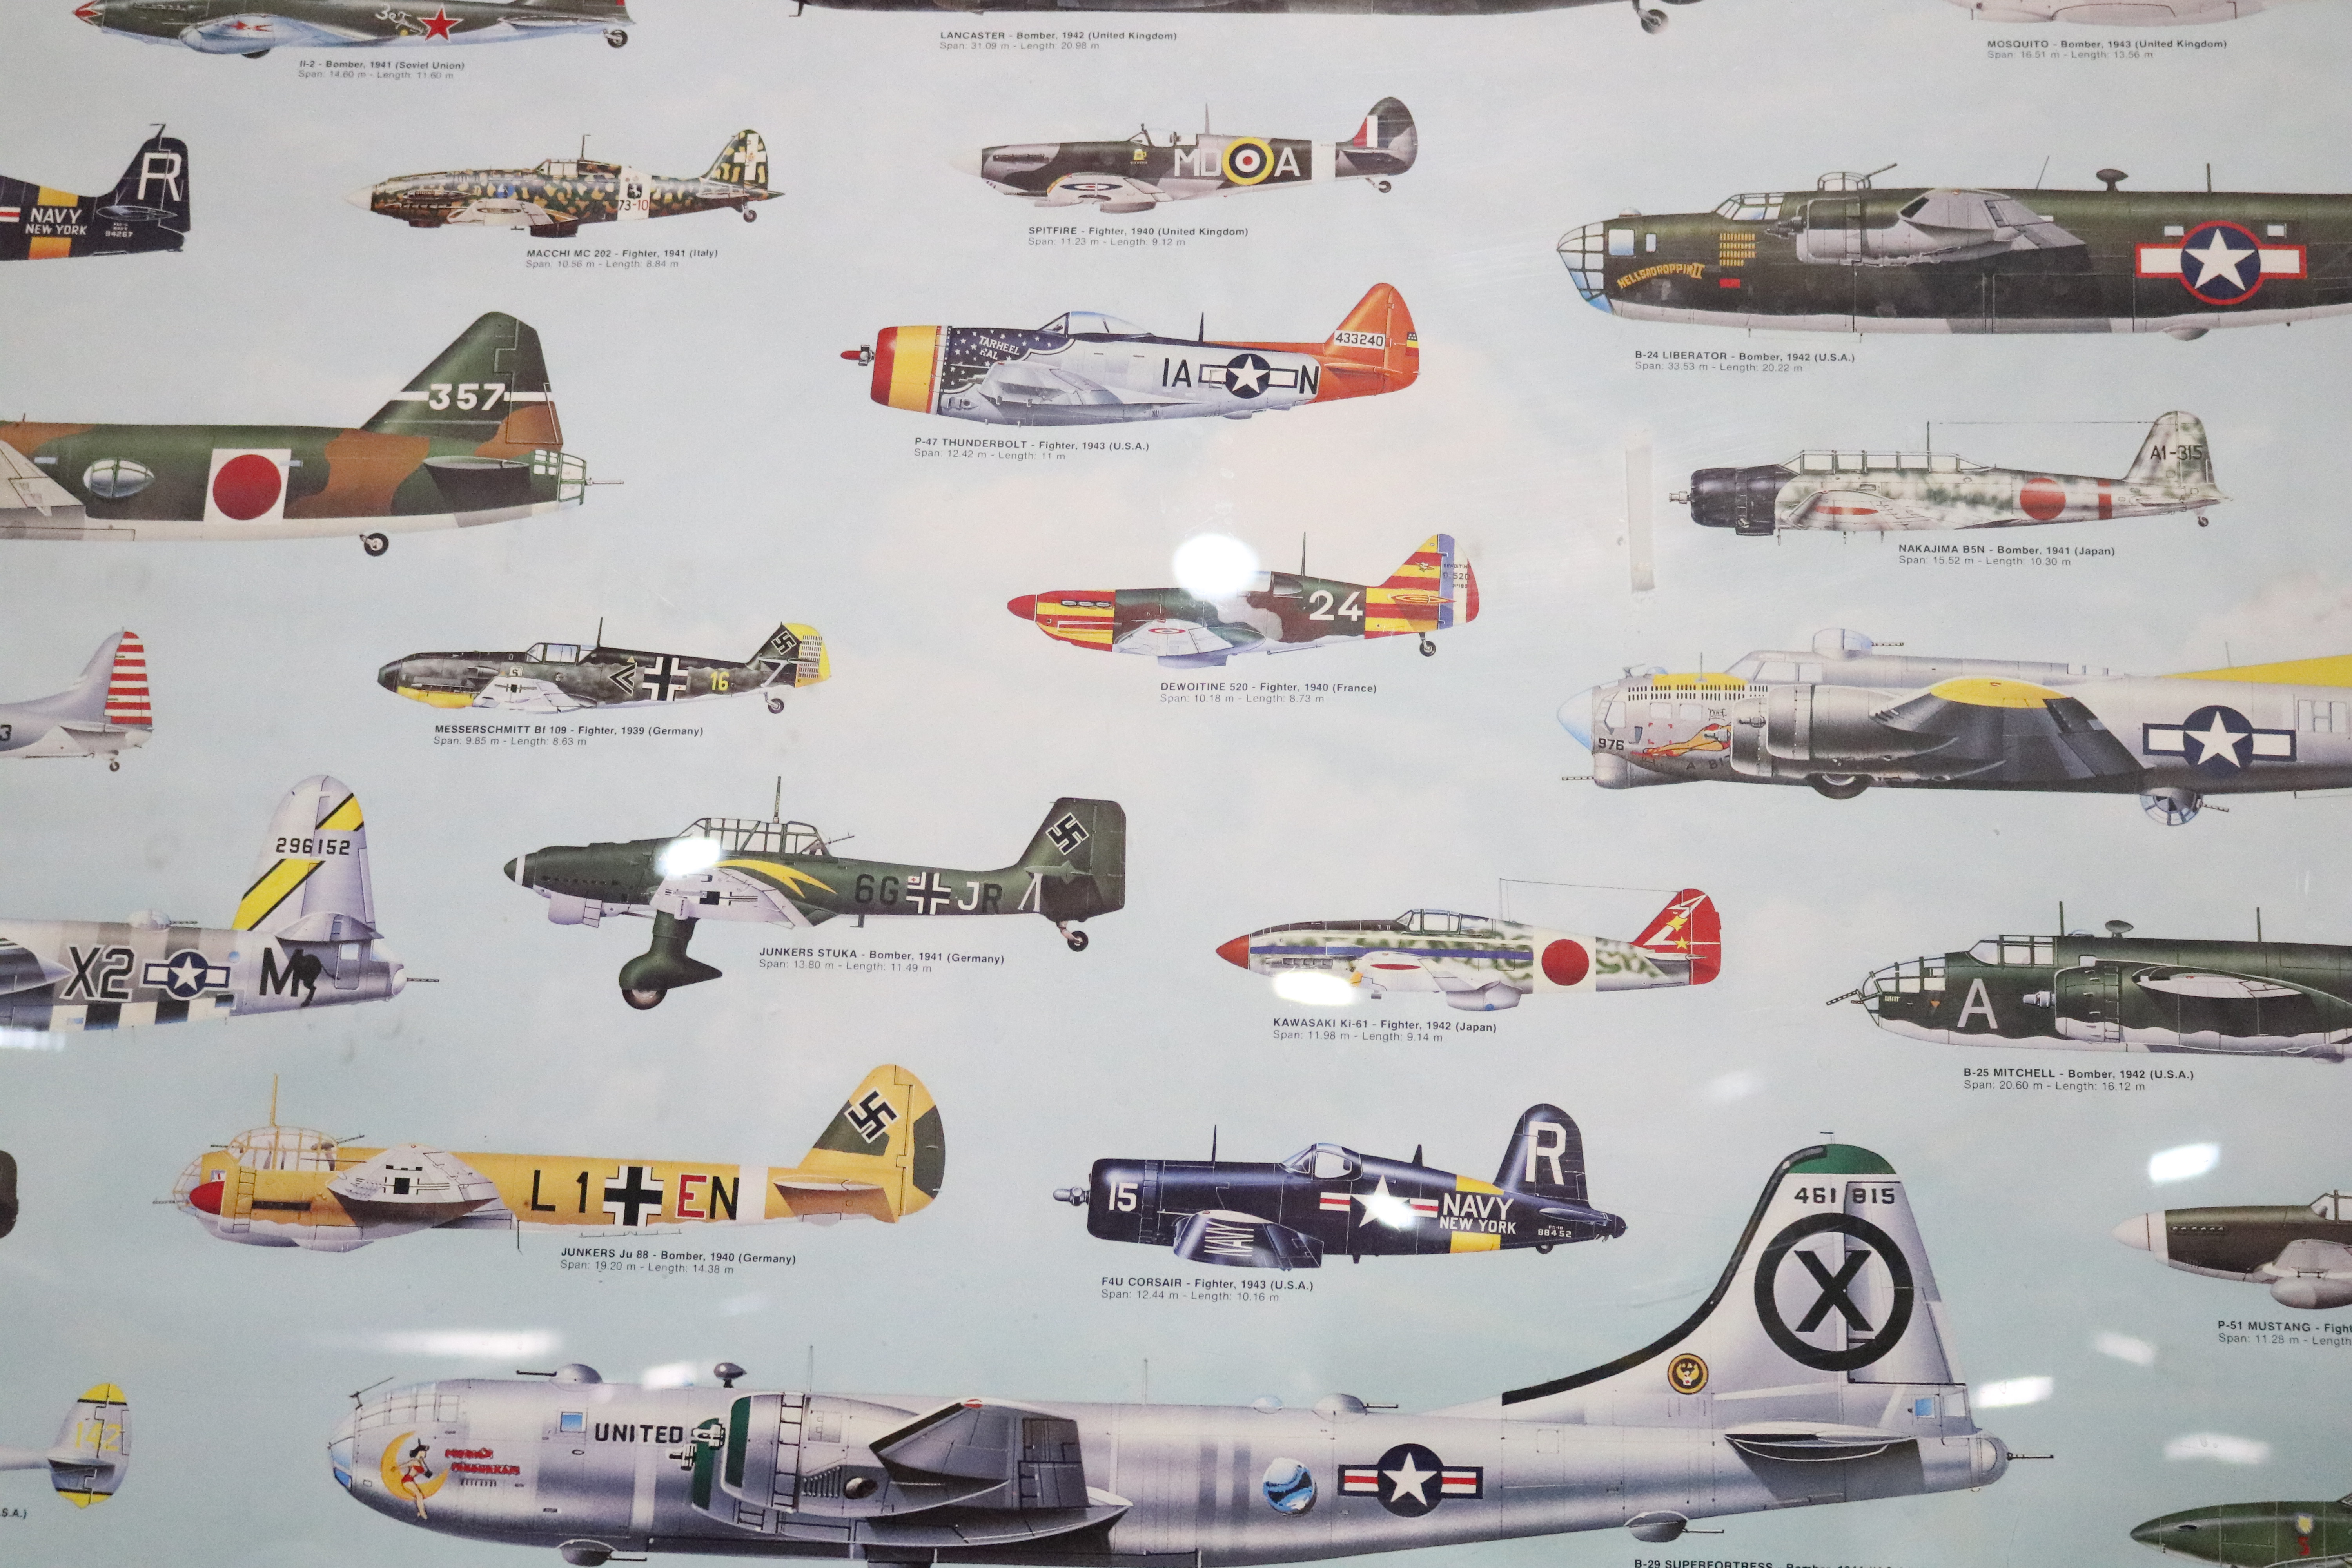 Poster of various US military airplanes